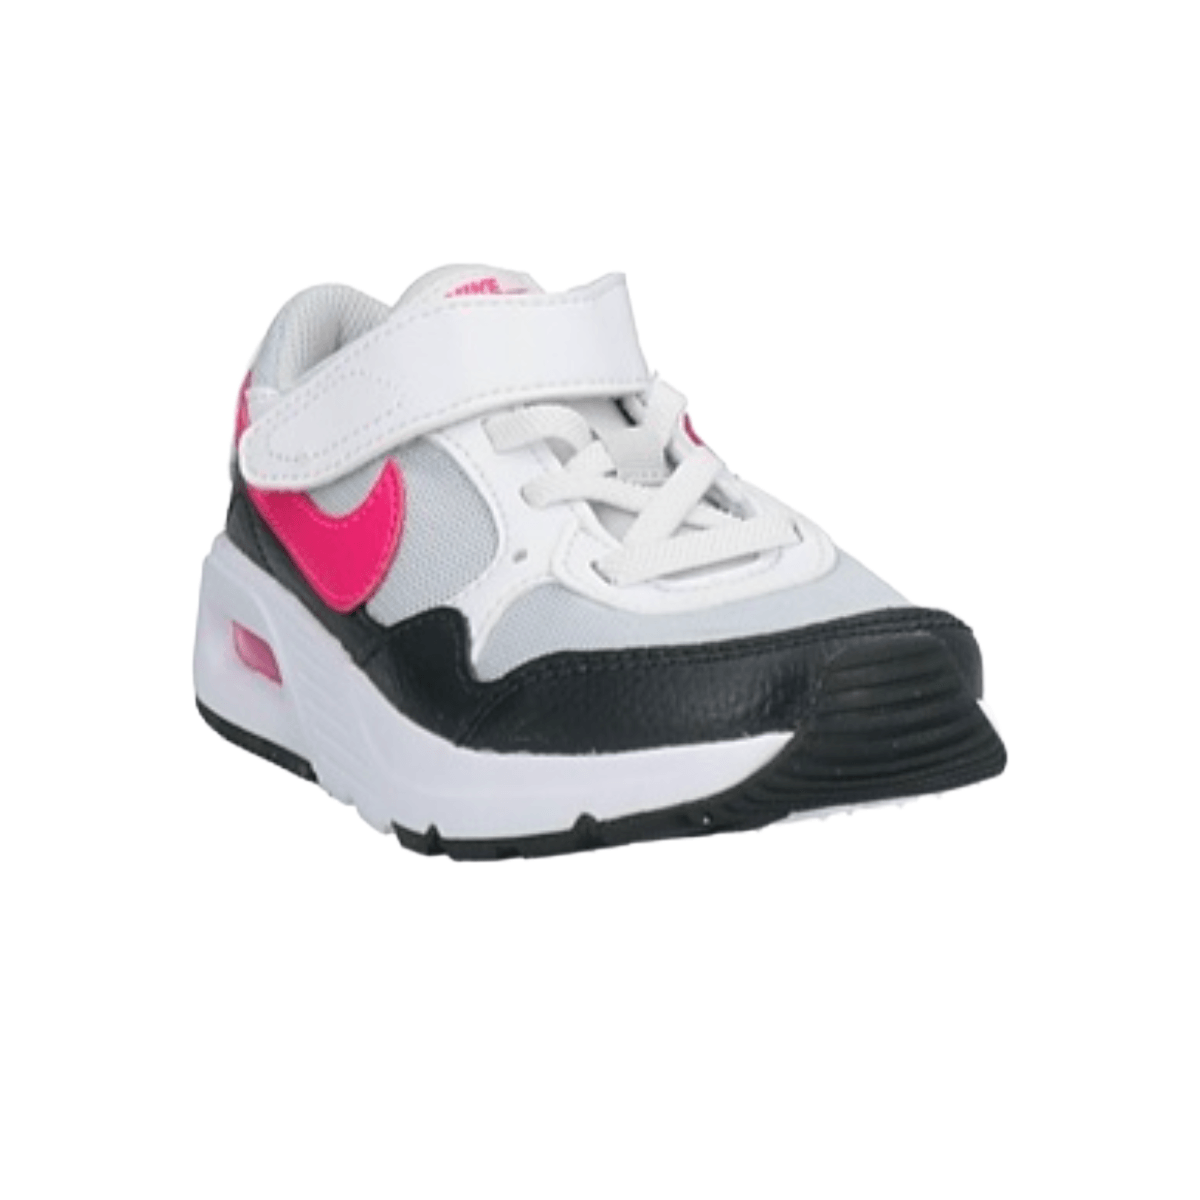 Nike Air Max SC Shoe - Youth